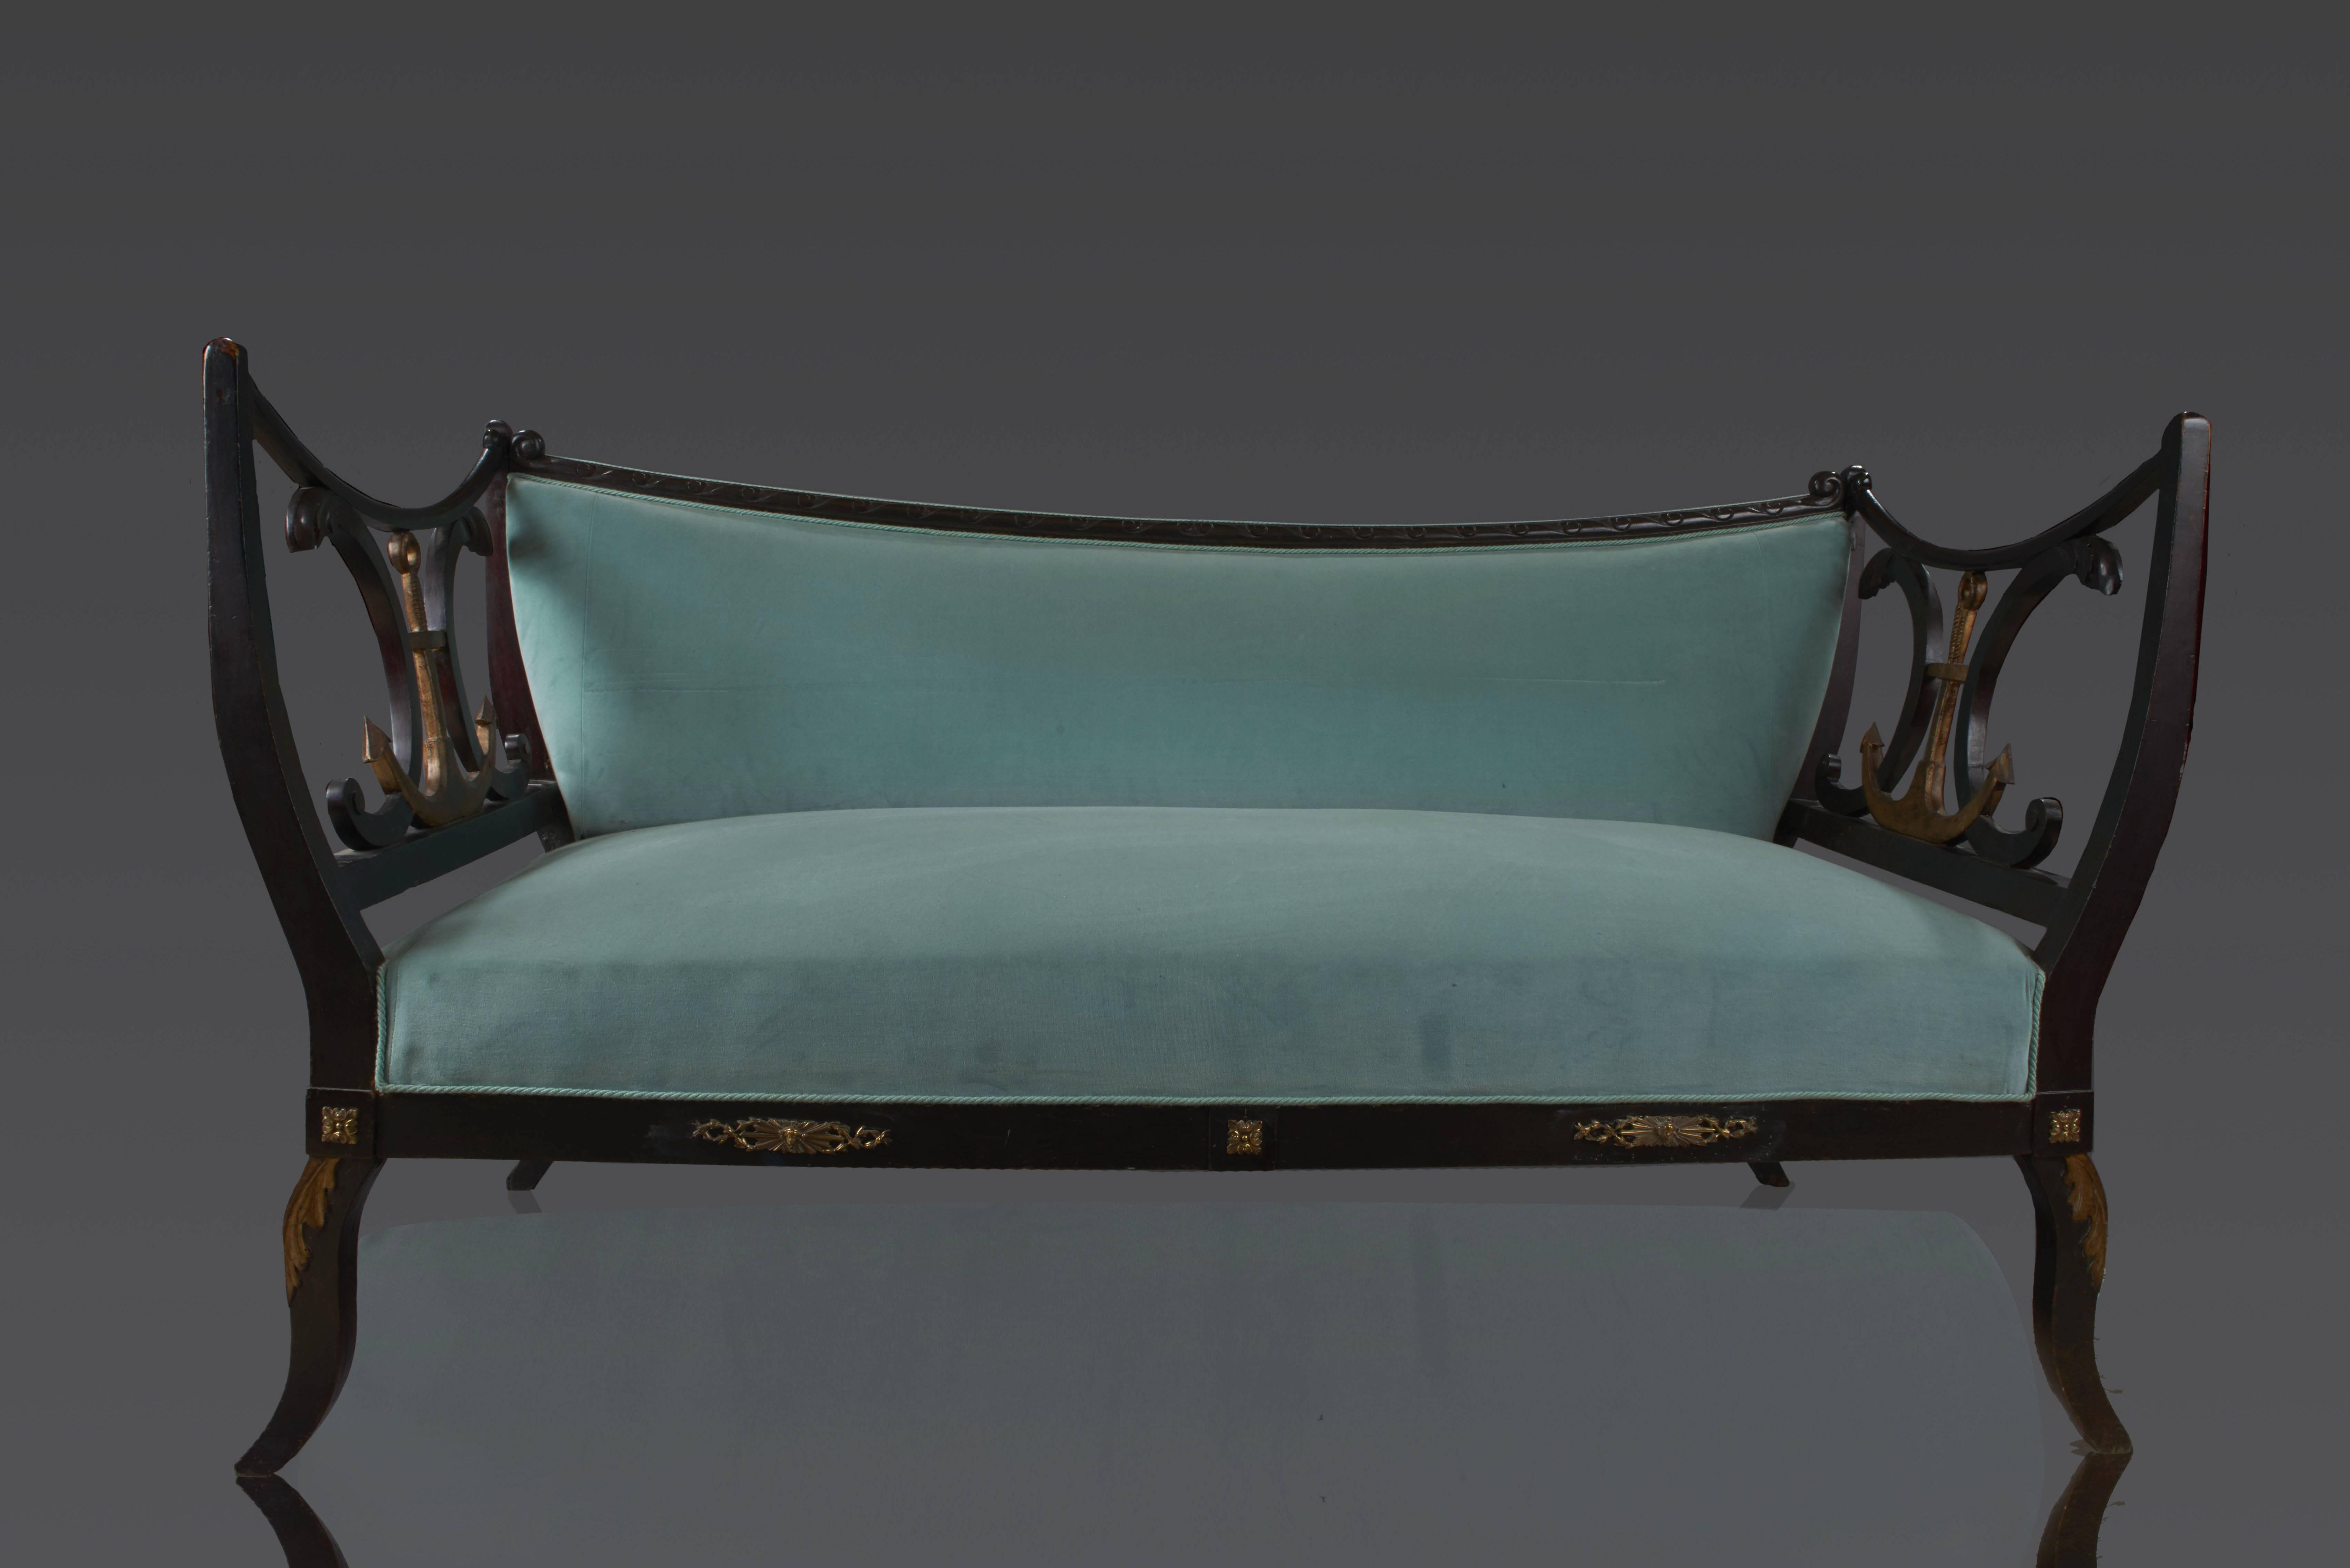 Sofa made of mahogany - carved with waves and leaves - covered with turquoise silk velvet - back lightly incurvated - armrests with golden marine anchors and interlacings - the anchor is the emblem of Hamburg and the sofa was probably made for this